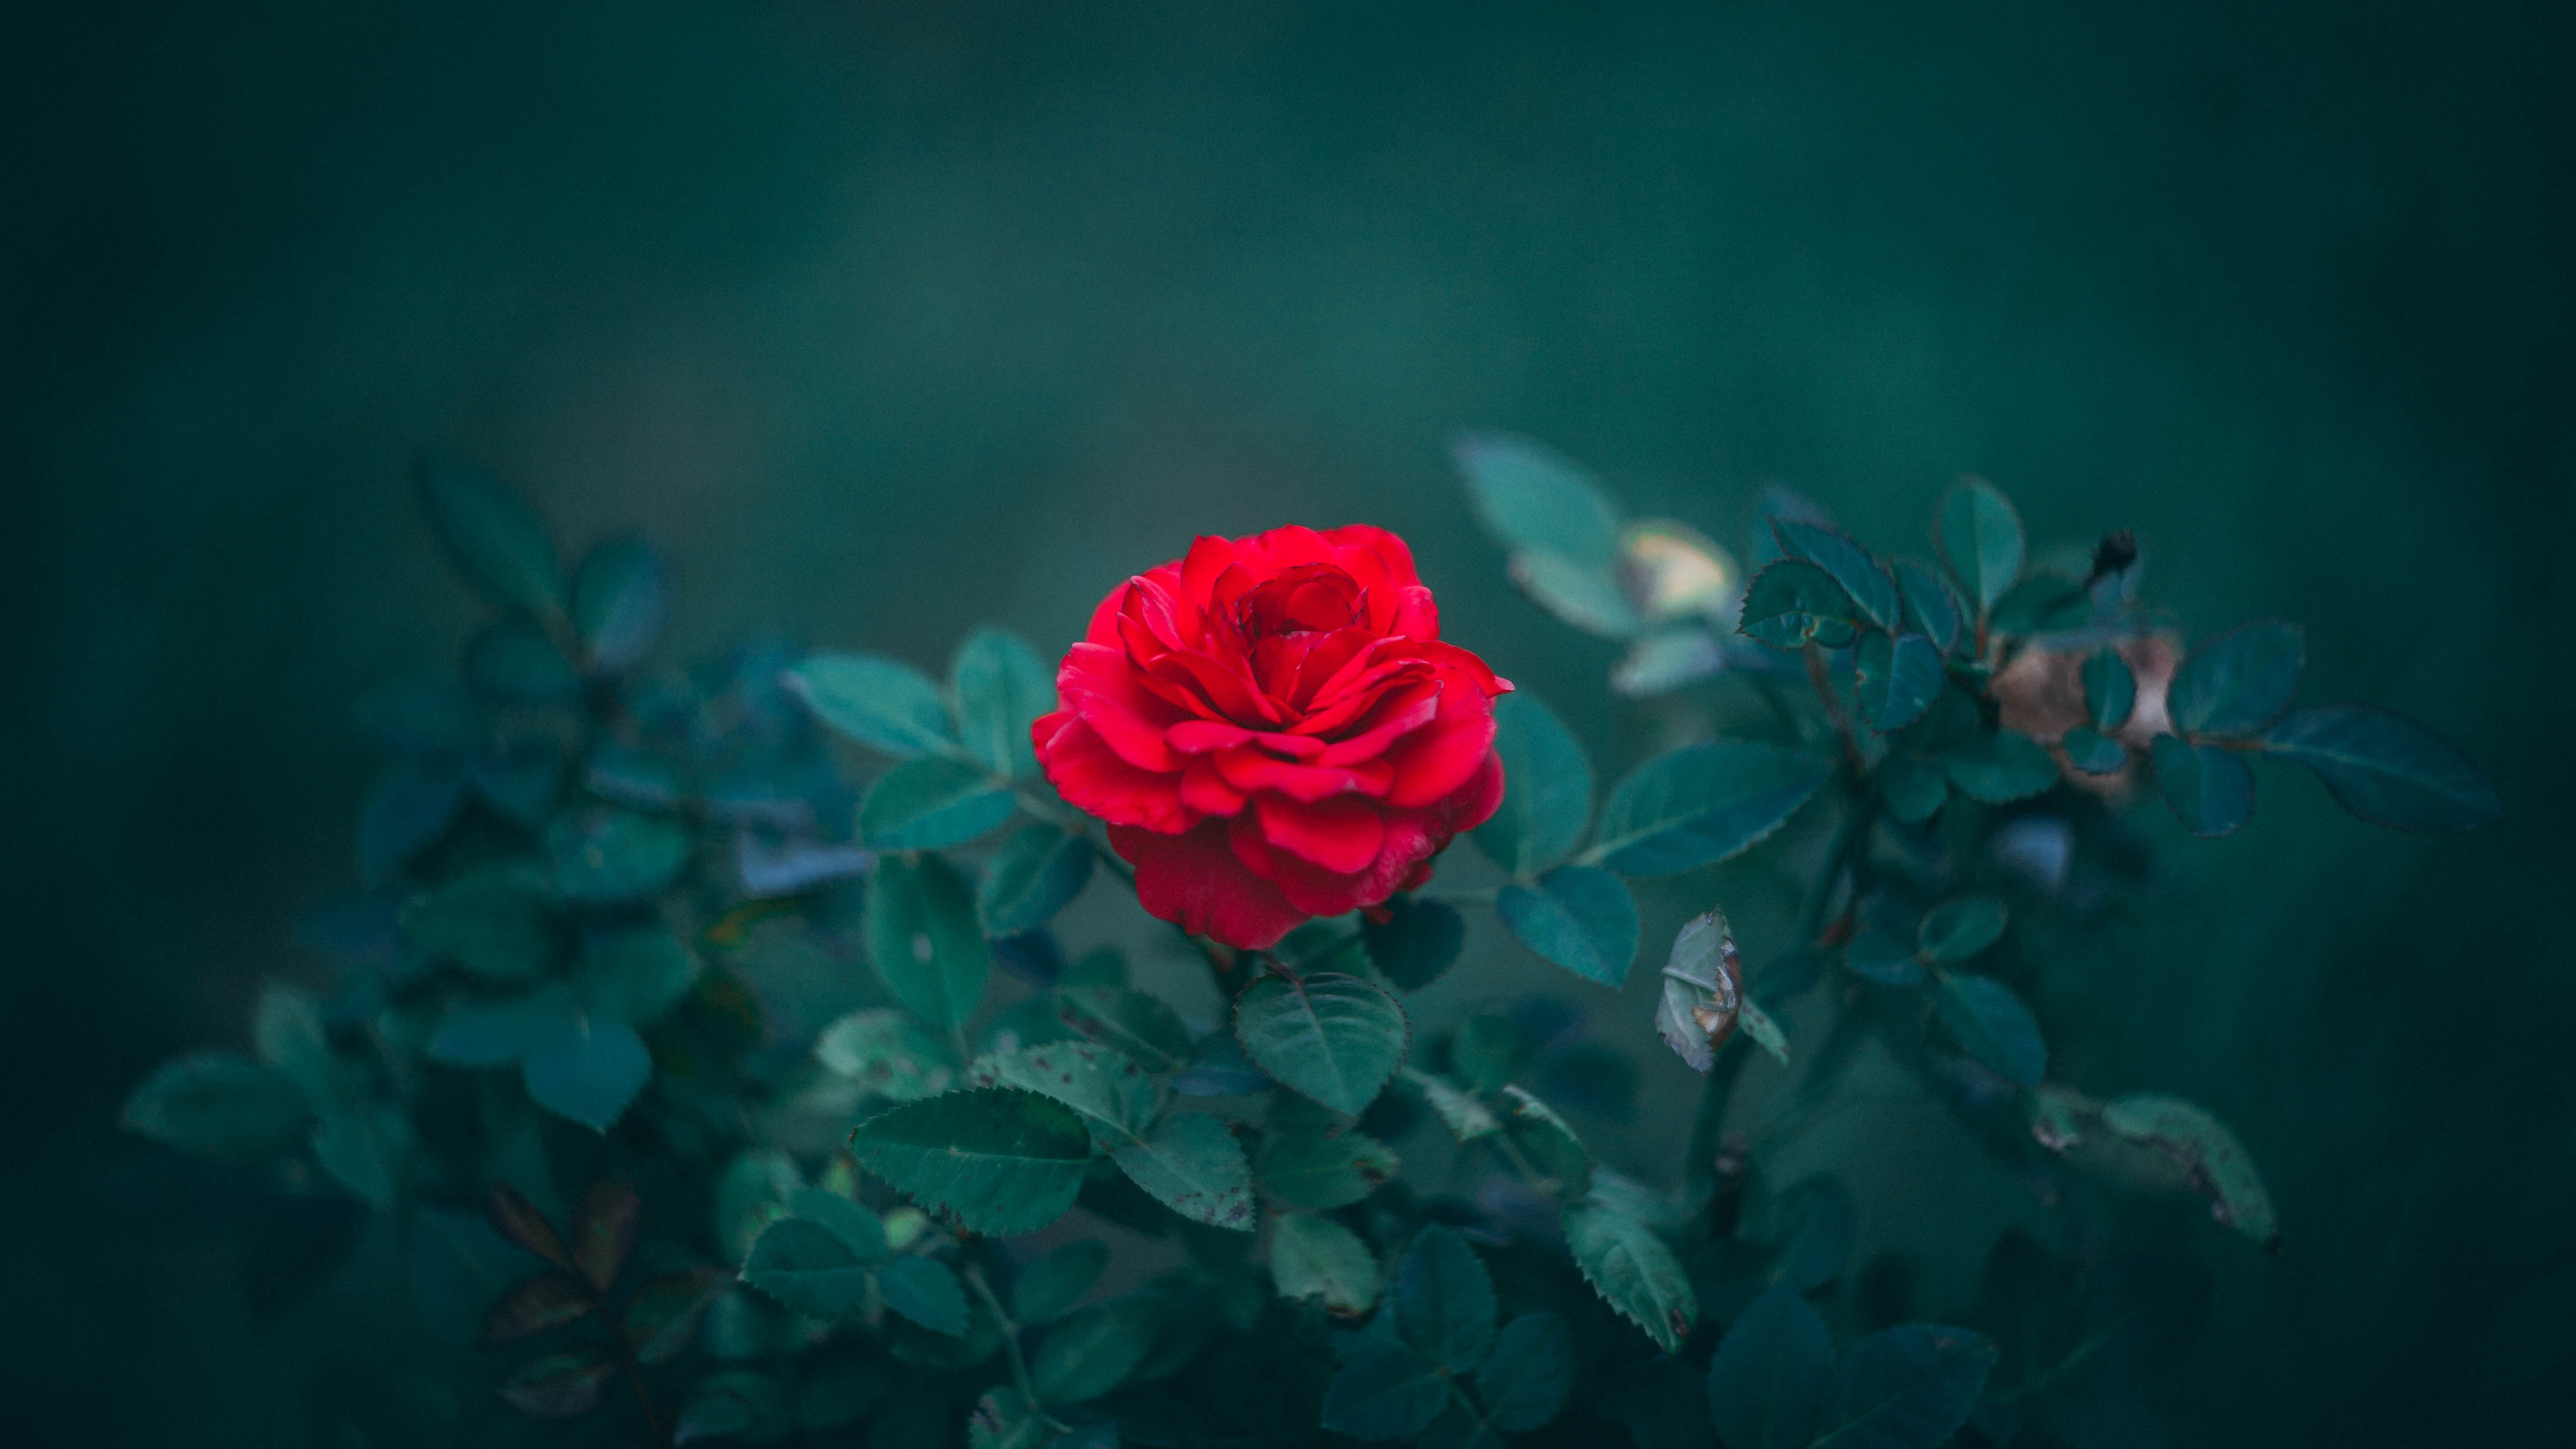 smooth, bud, leaves, rose flower, red, flowers, bush, rose, blur for android